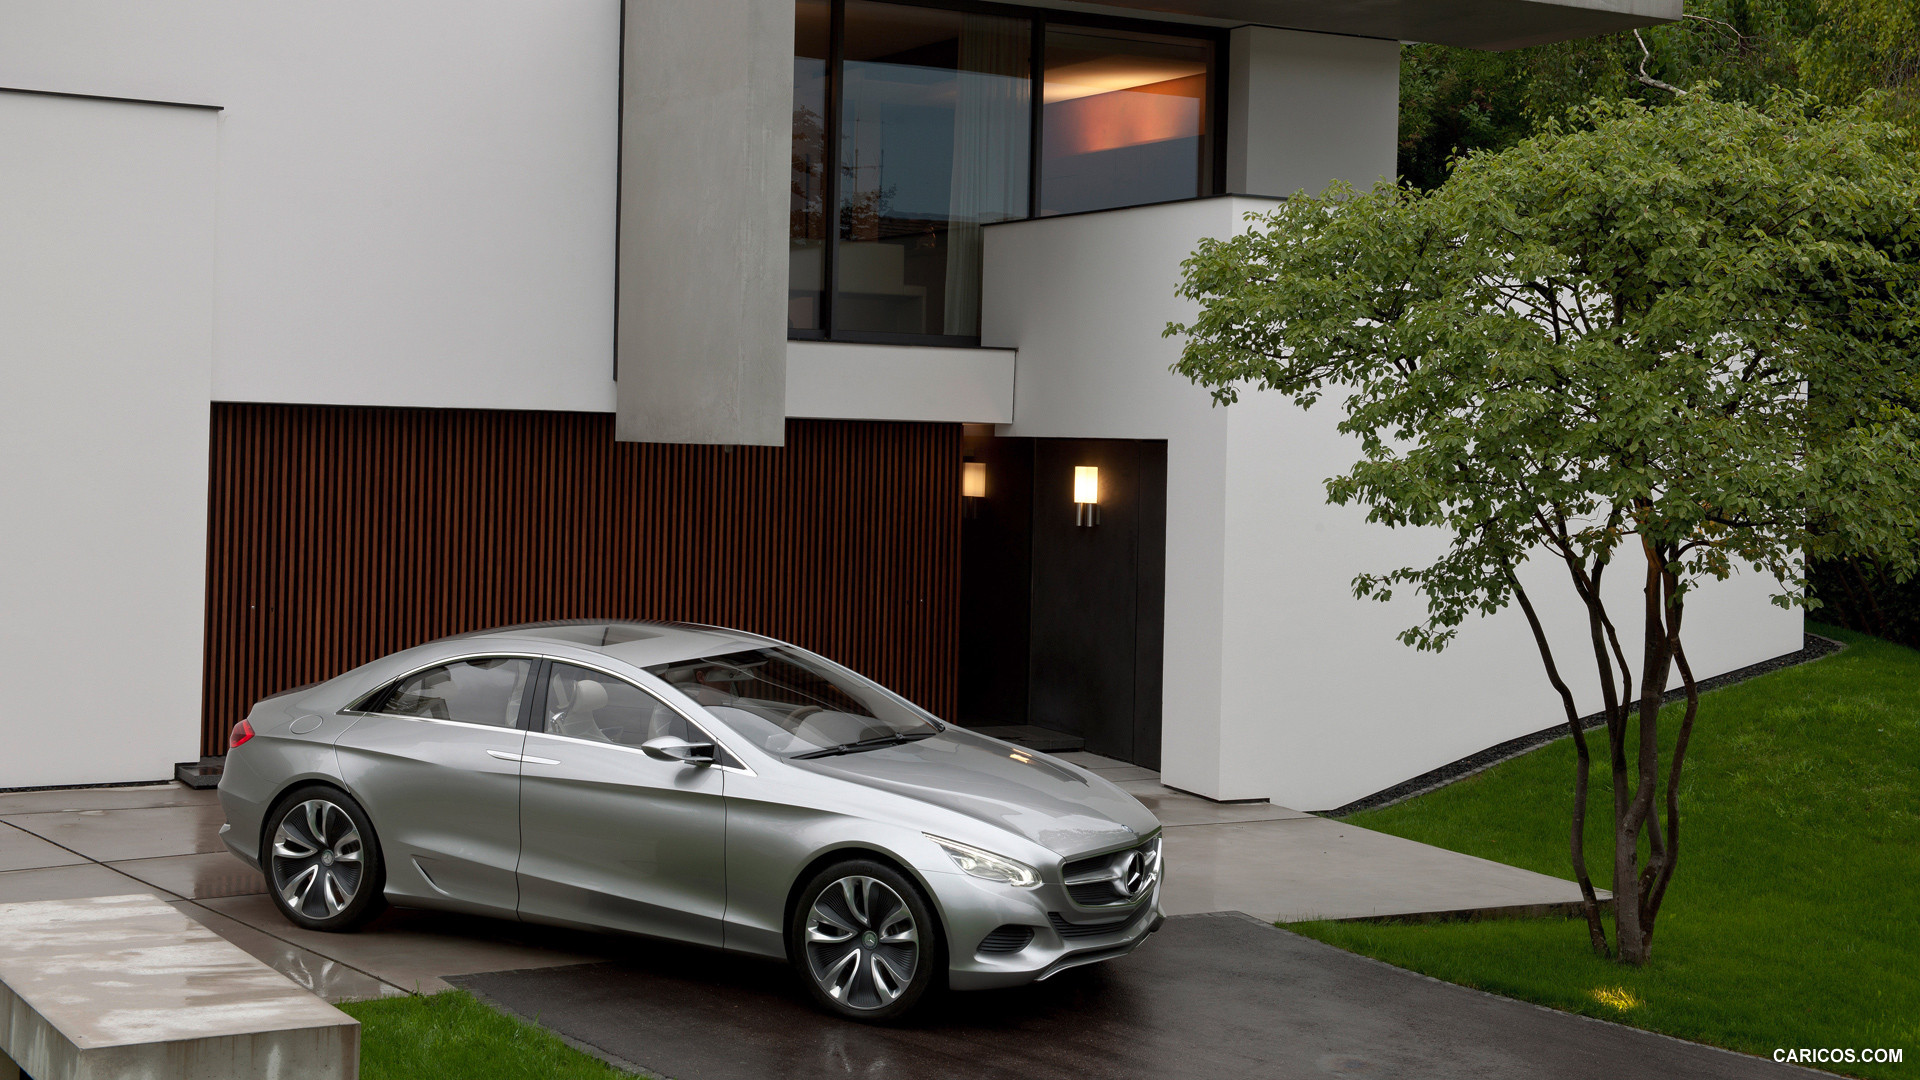 Mercedes-Benz F800 Style Concept (2010)  - Front Right Quarter , #25 of 120